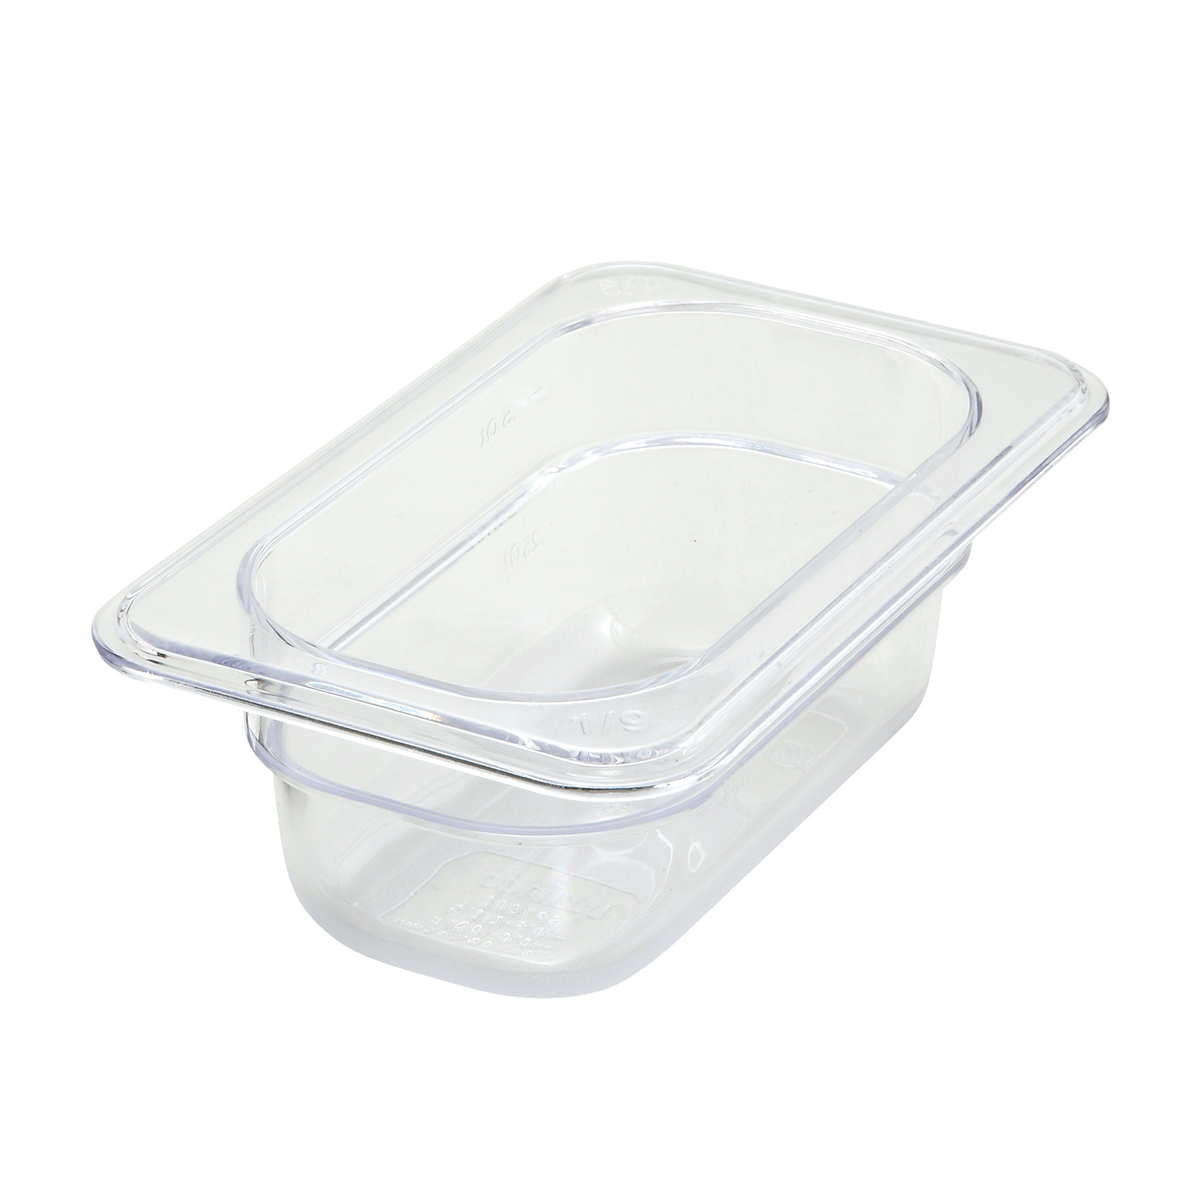 Winco SP7902 Poly-Ware Polycarbonate 1/9 Size Food Pan 2-1/2" High